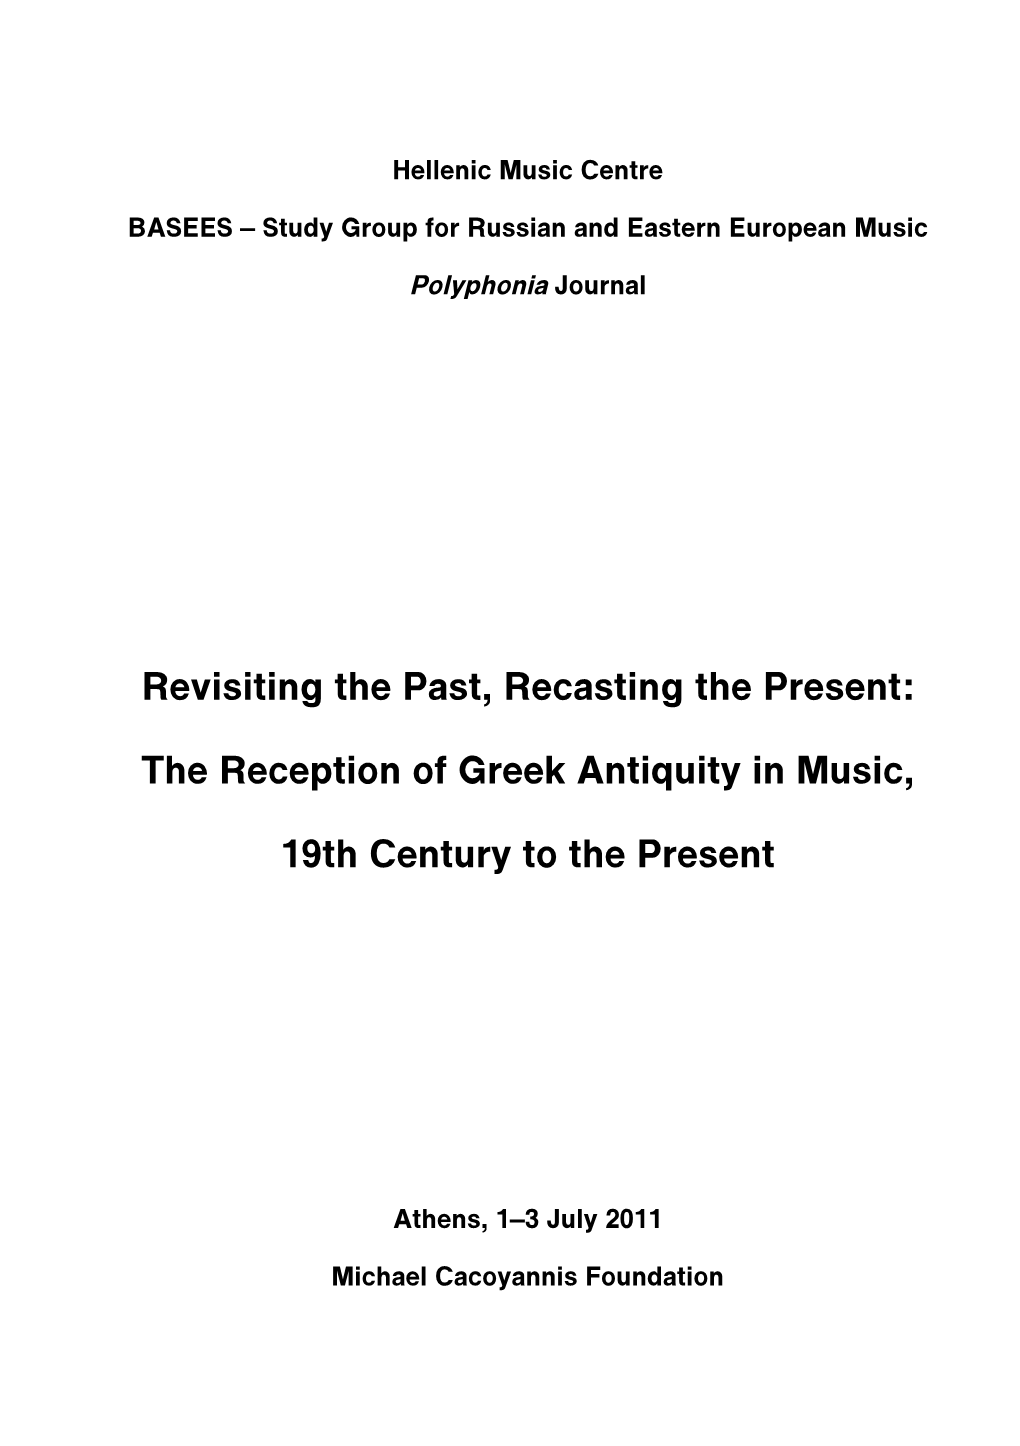 The Reception of Greek Antiquity in Music, 19Th Century to the Present’ Website Construction and Support by Tassos Kolydas